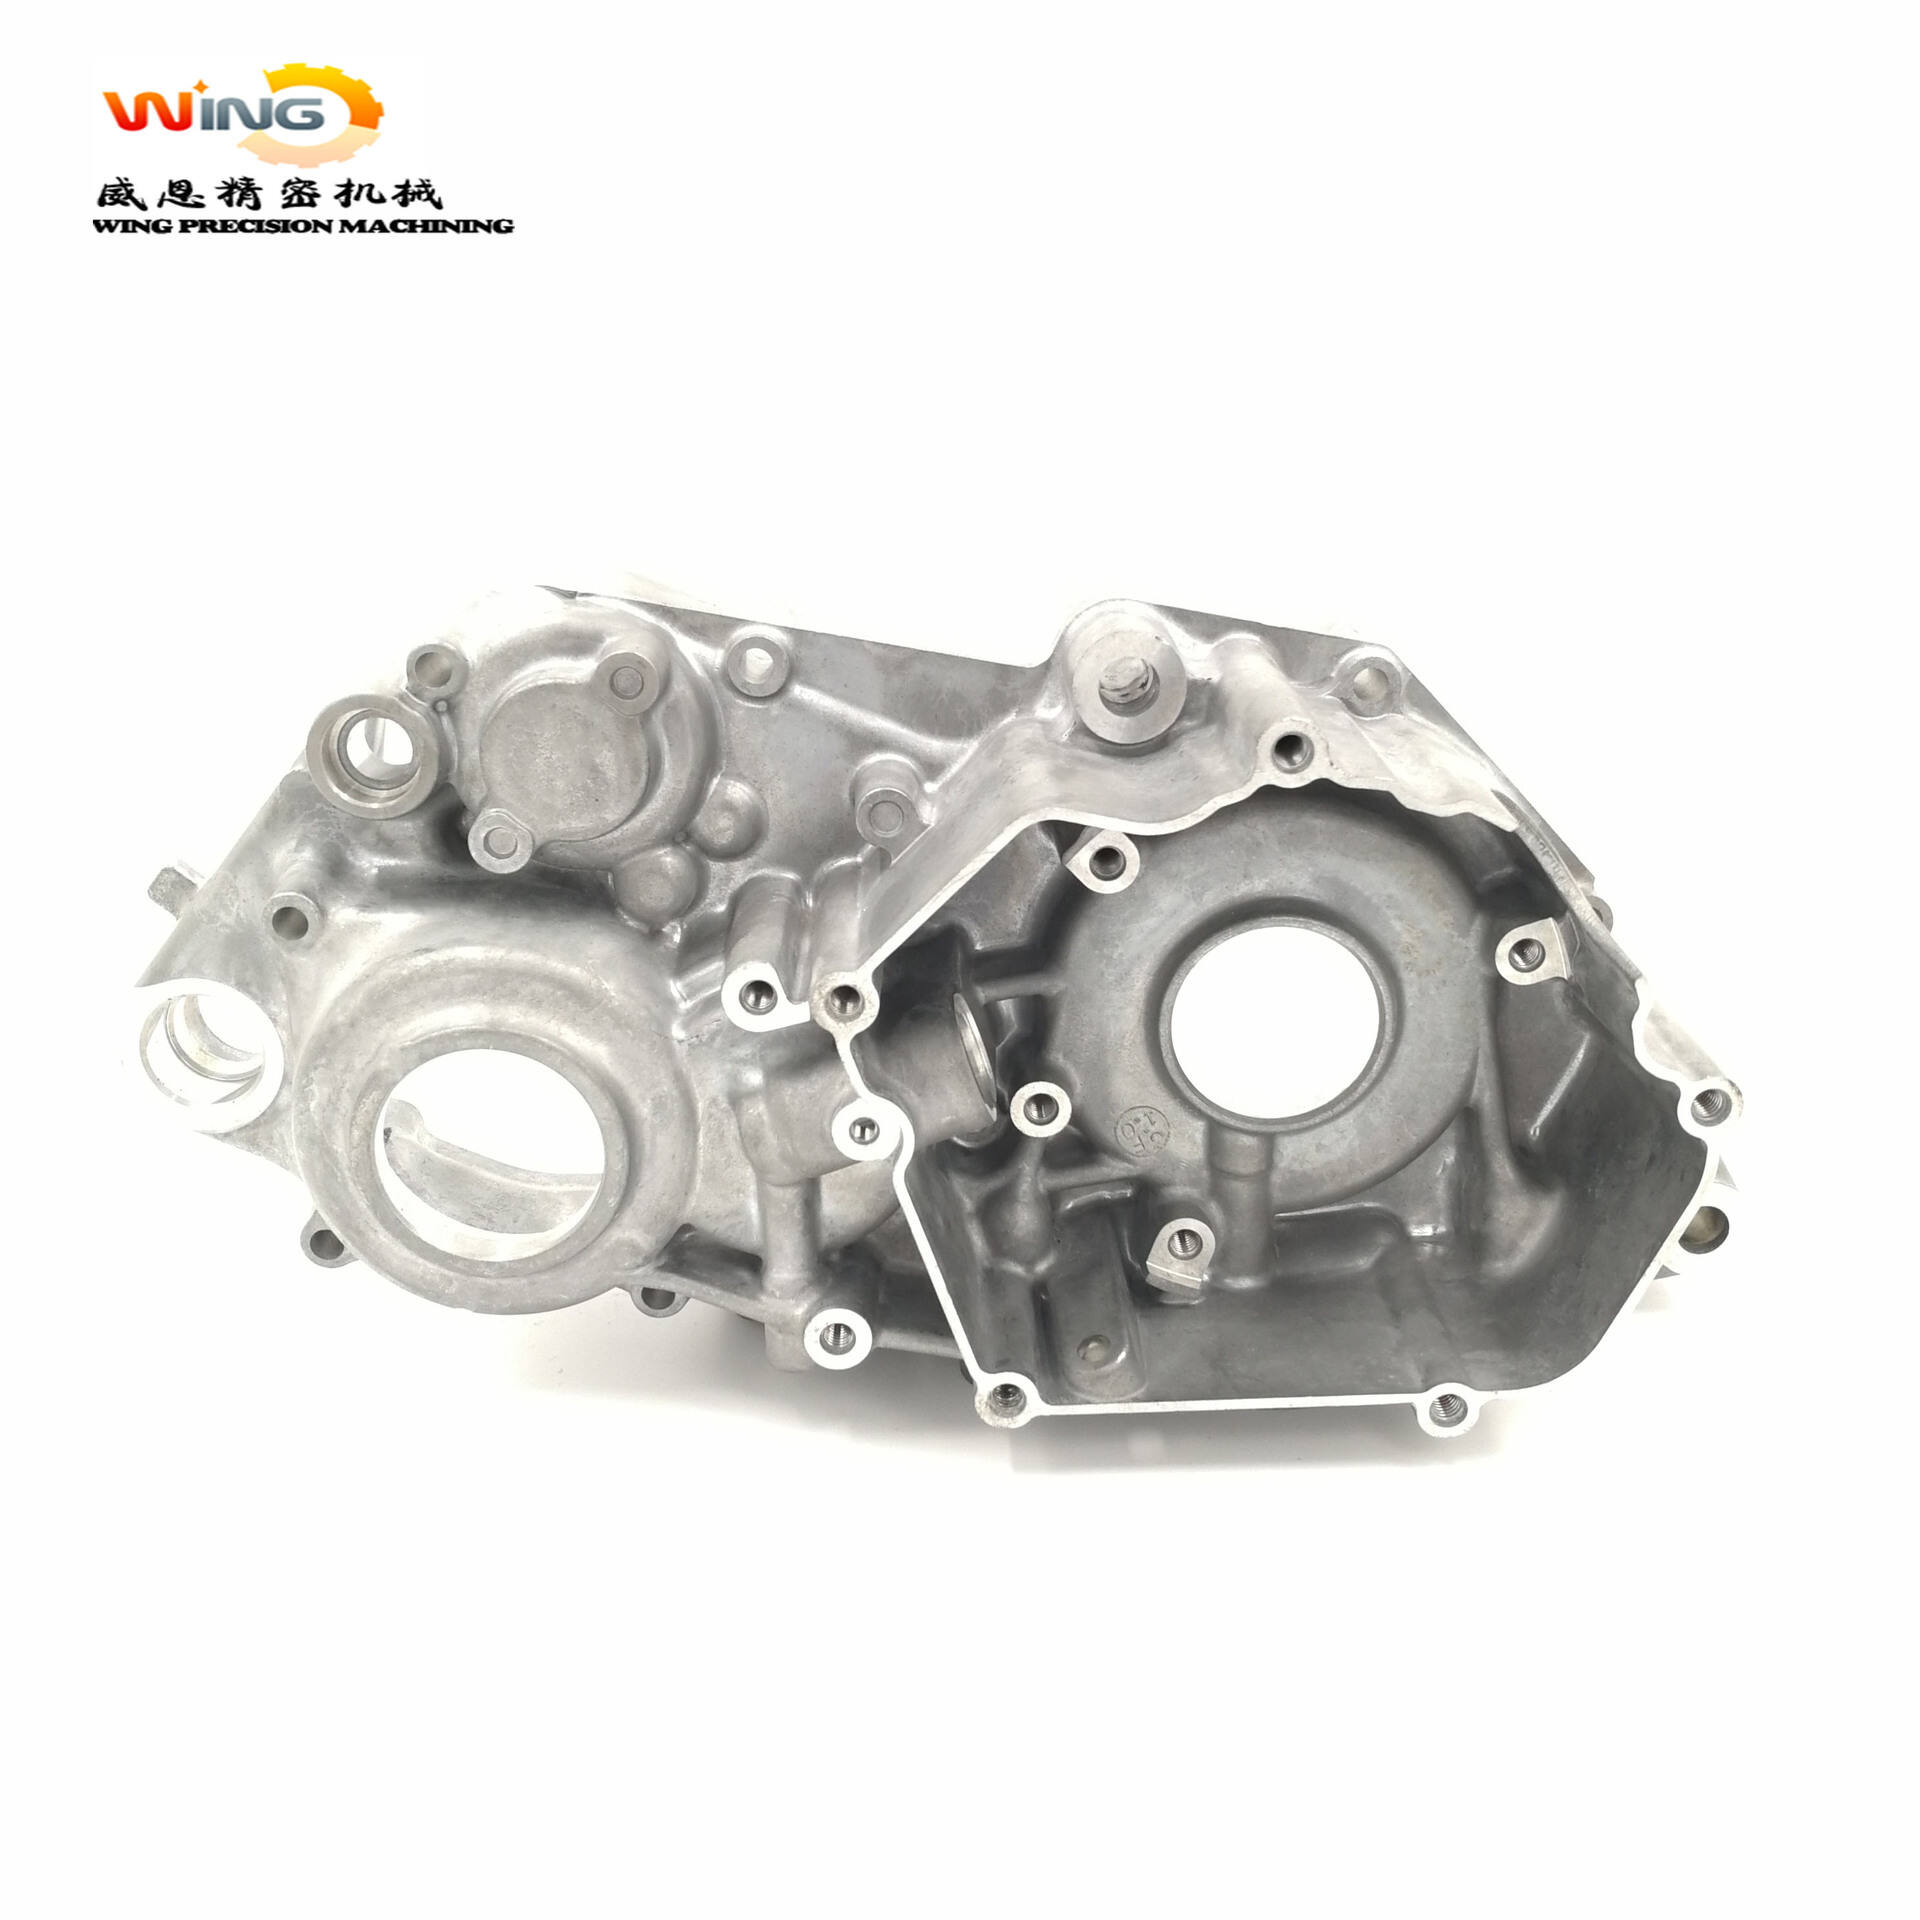 Motorcycle Engine Cover Crankcase Machining，LvDa-CNC-2029 CNC Aluminum Clutch Model Motorcycle Tools